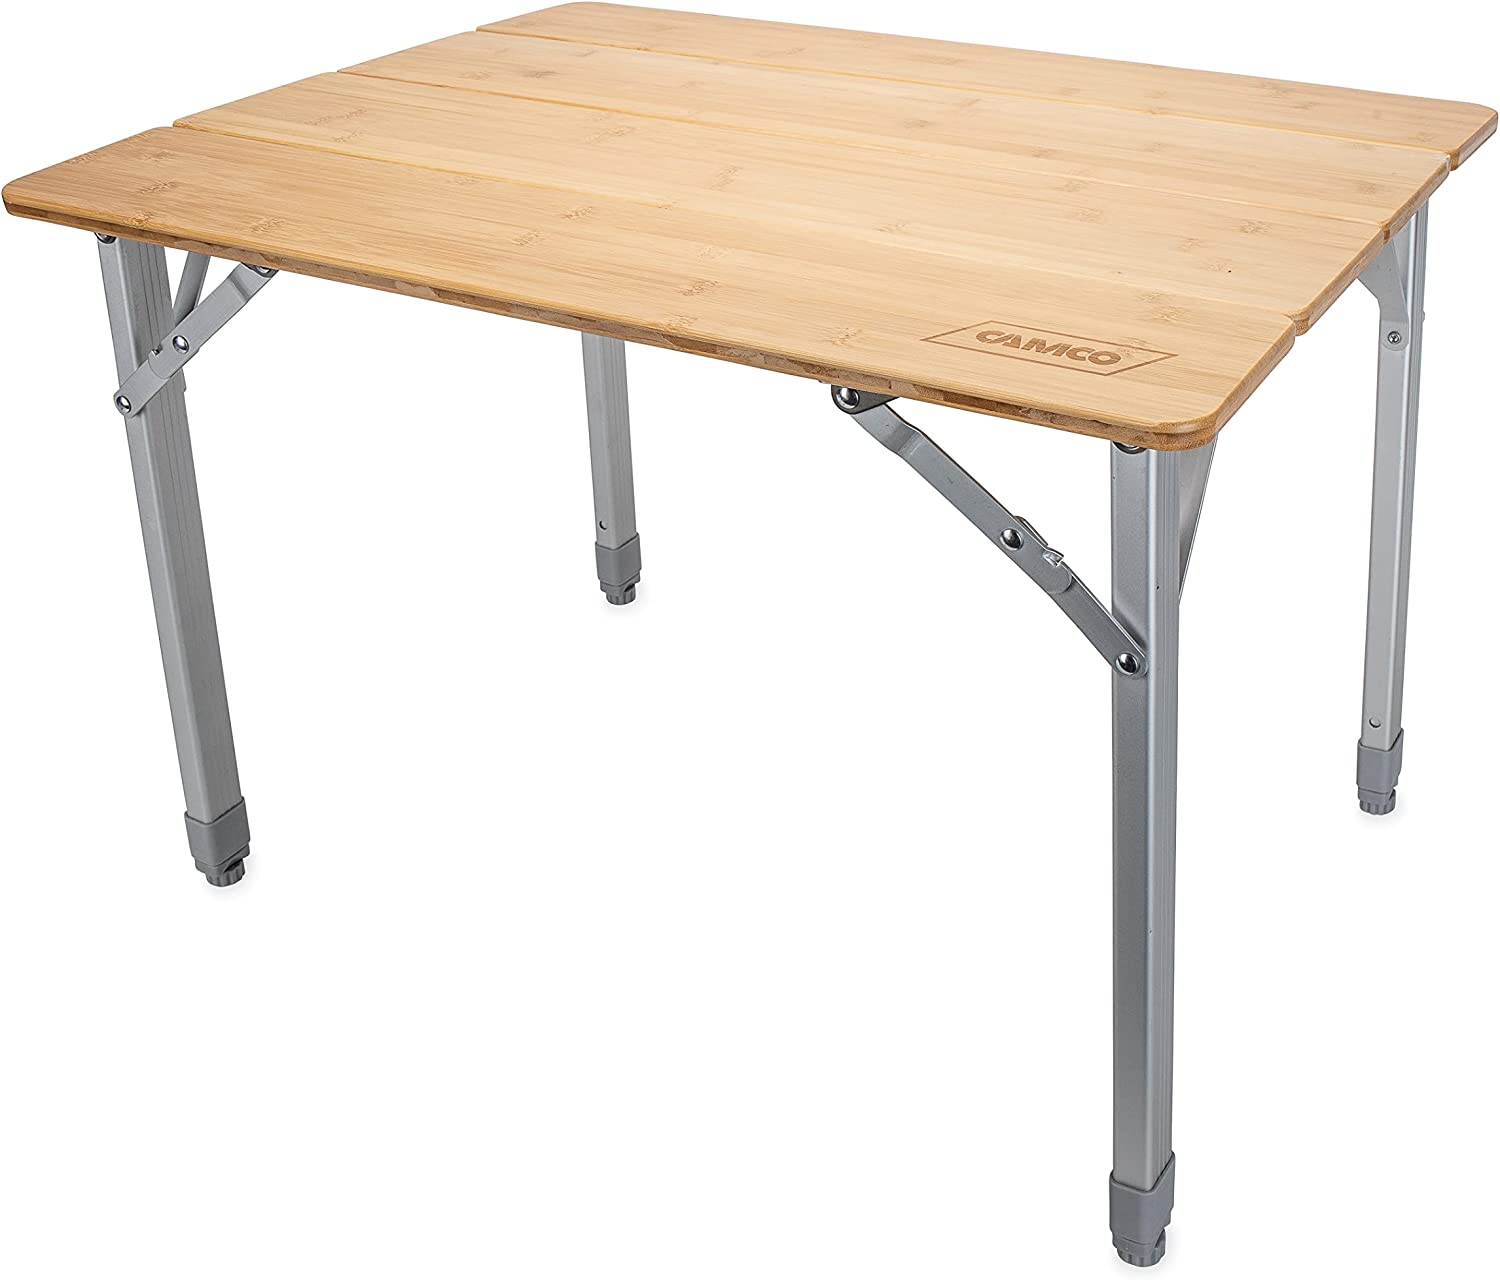 Camco 51895 Bamboo Folding Table with Aluminum Legs- Compact Design